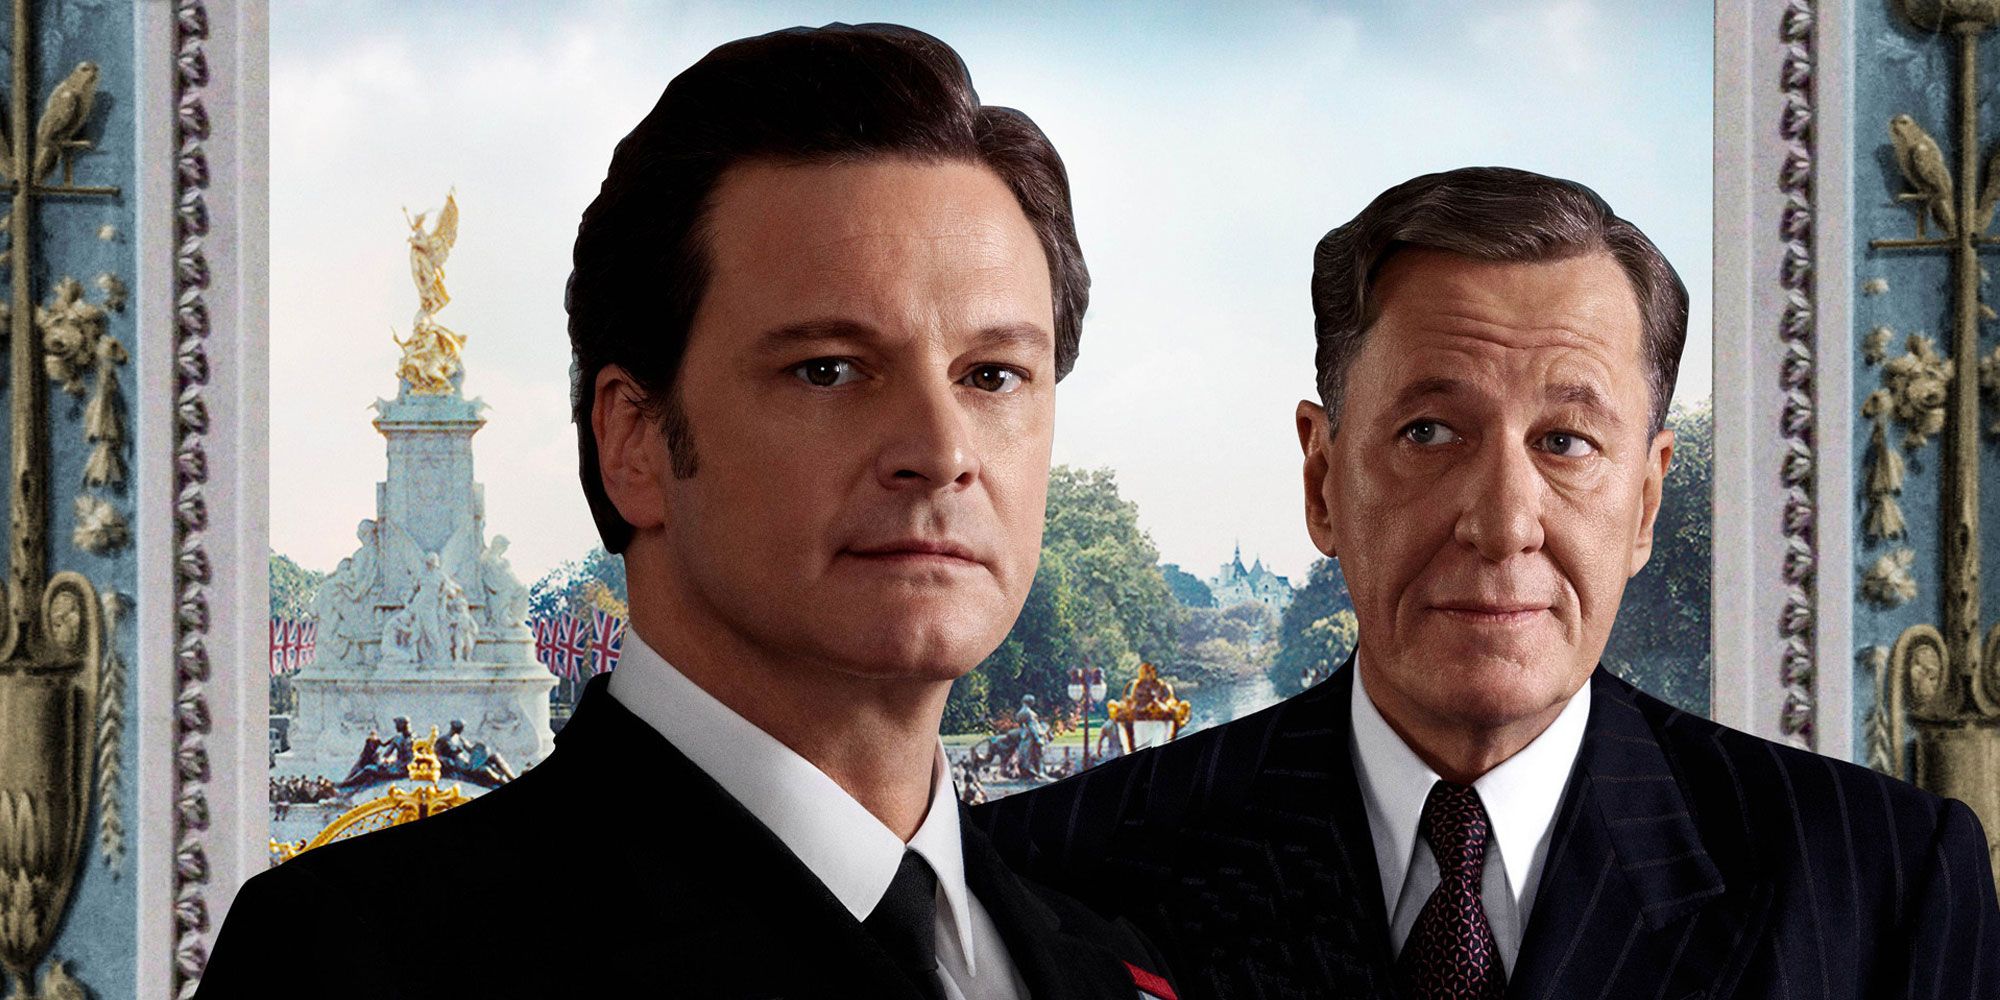 The stuttering king and his speech teacher wear suits and ties on the poster for The King's Speech.